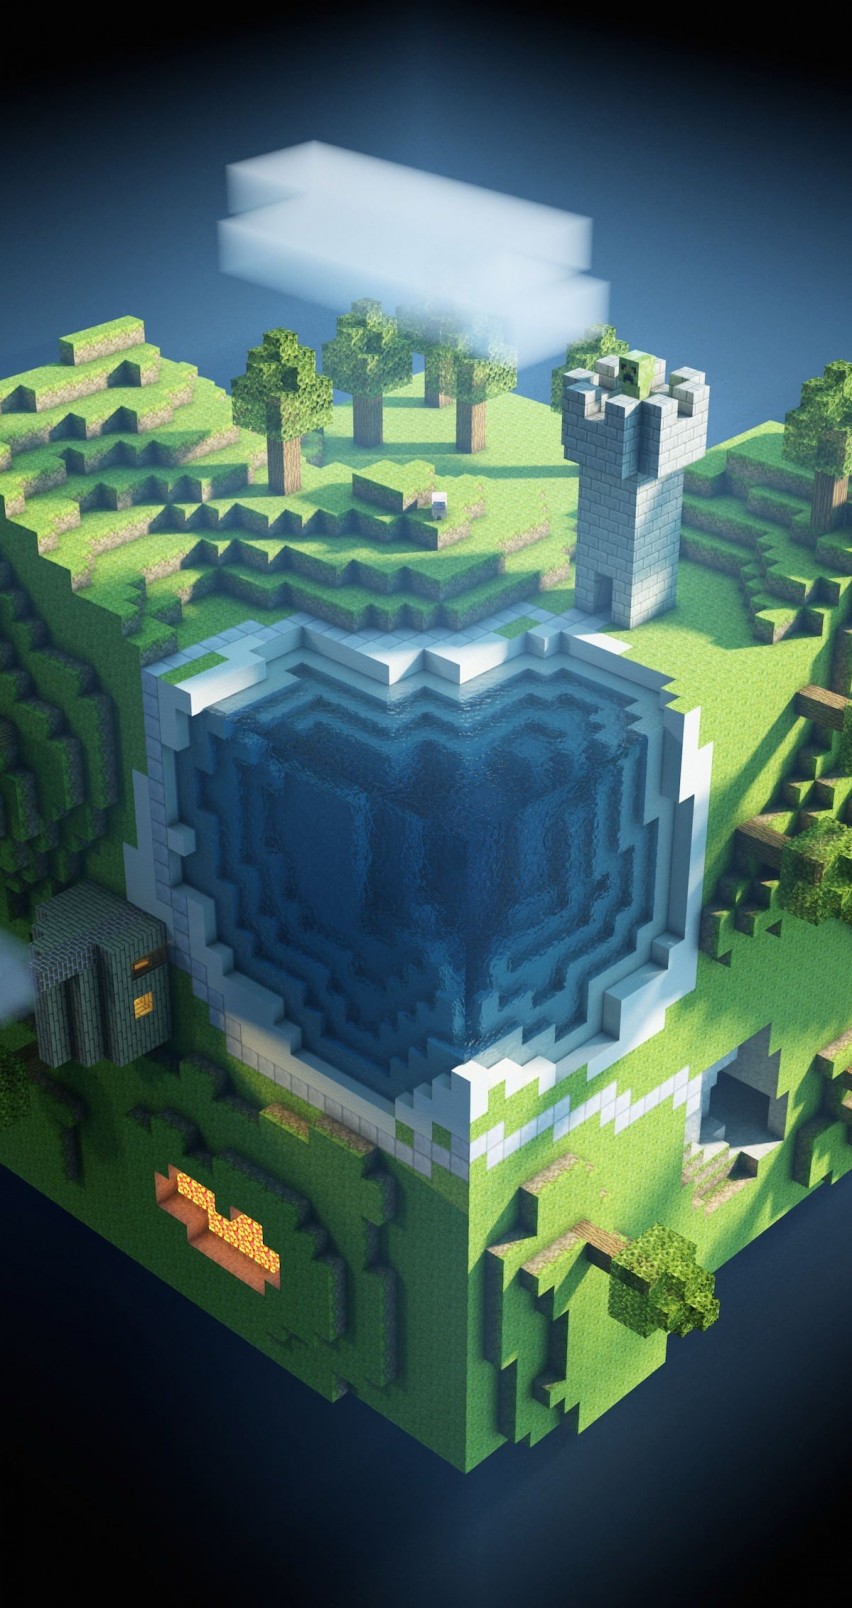 Planet Minecraft Wallpaper for Apple iPhone 6 / 6s